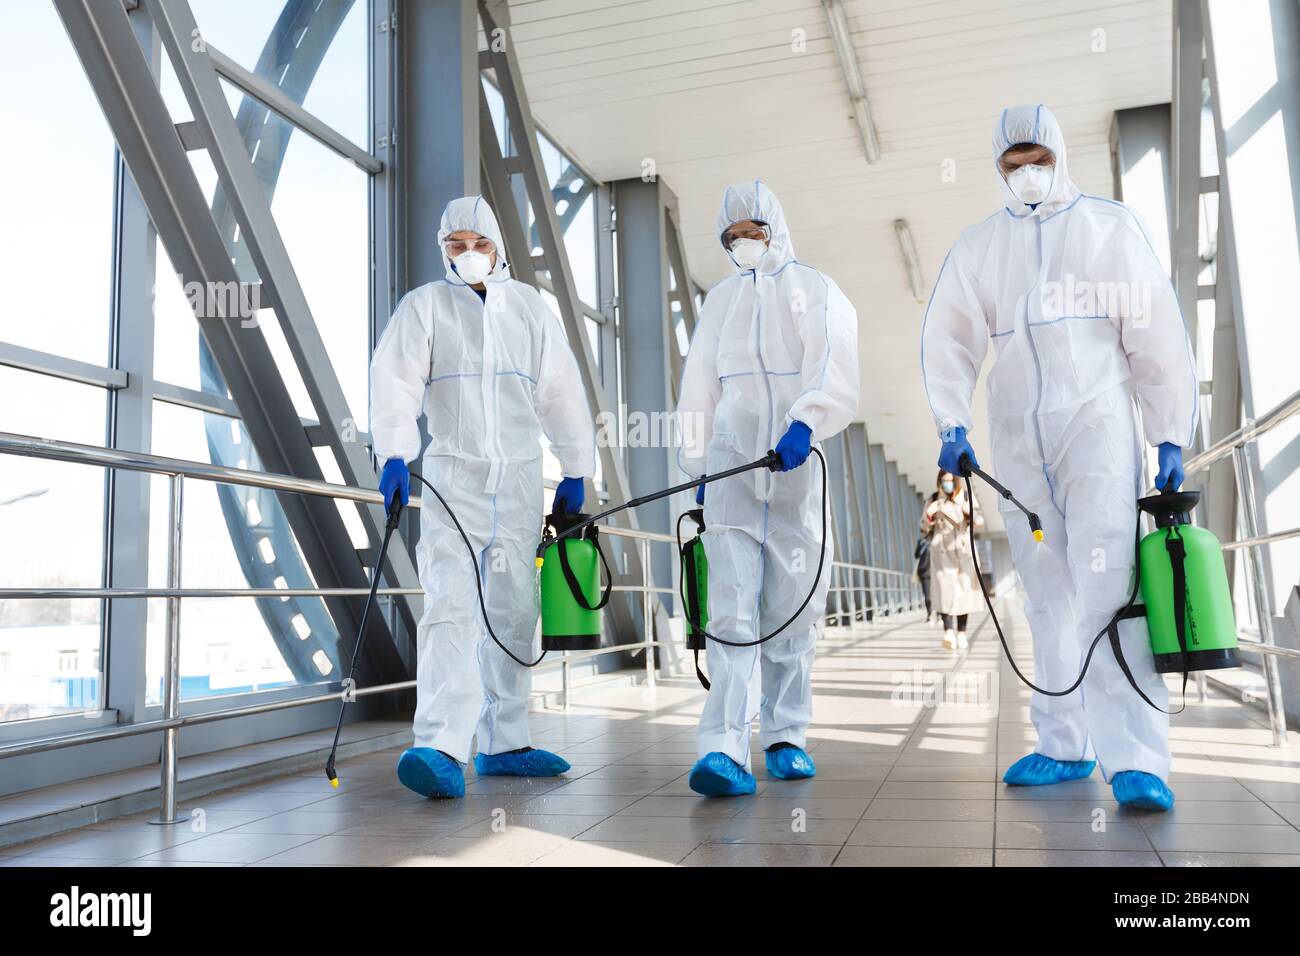 Medical staff wearing protective clothing disinfects the public place Stock Photo